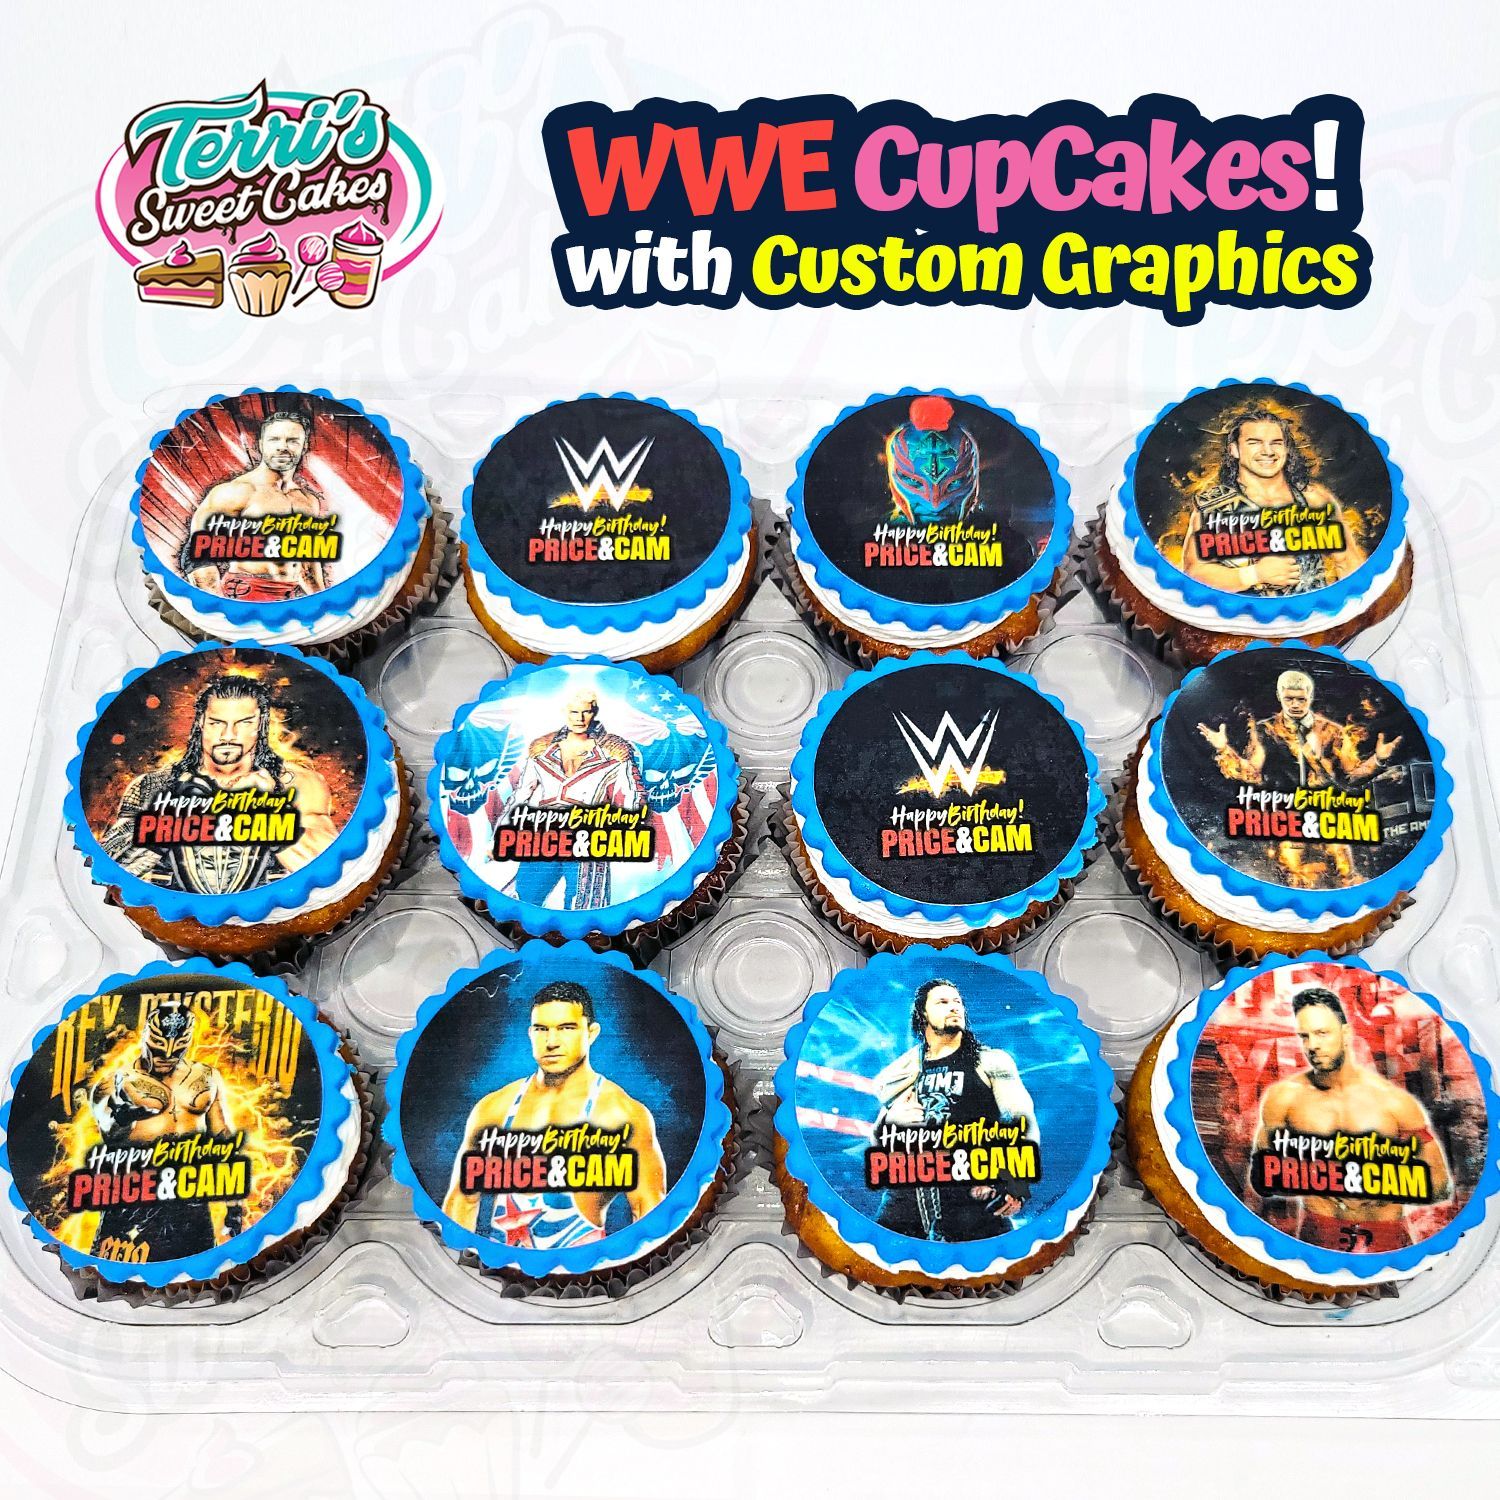 WWE CupCakes with custom graphics by Terri's Sweet Cakes!